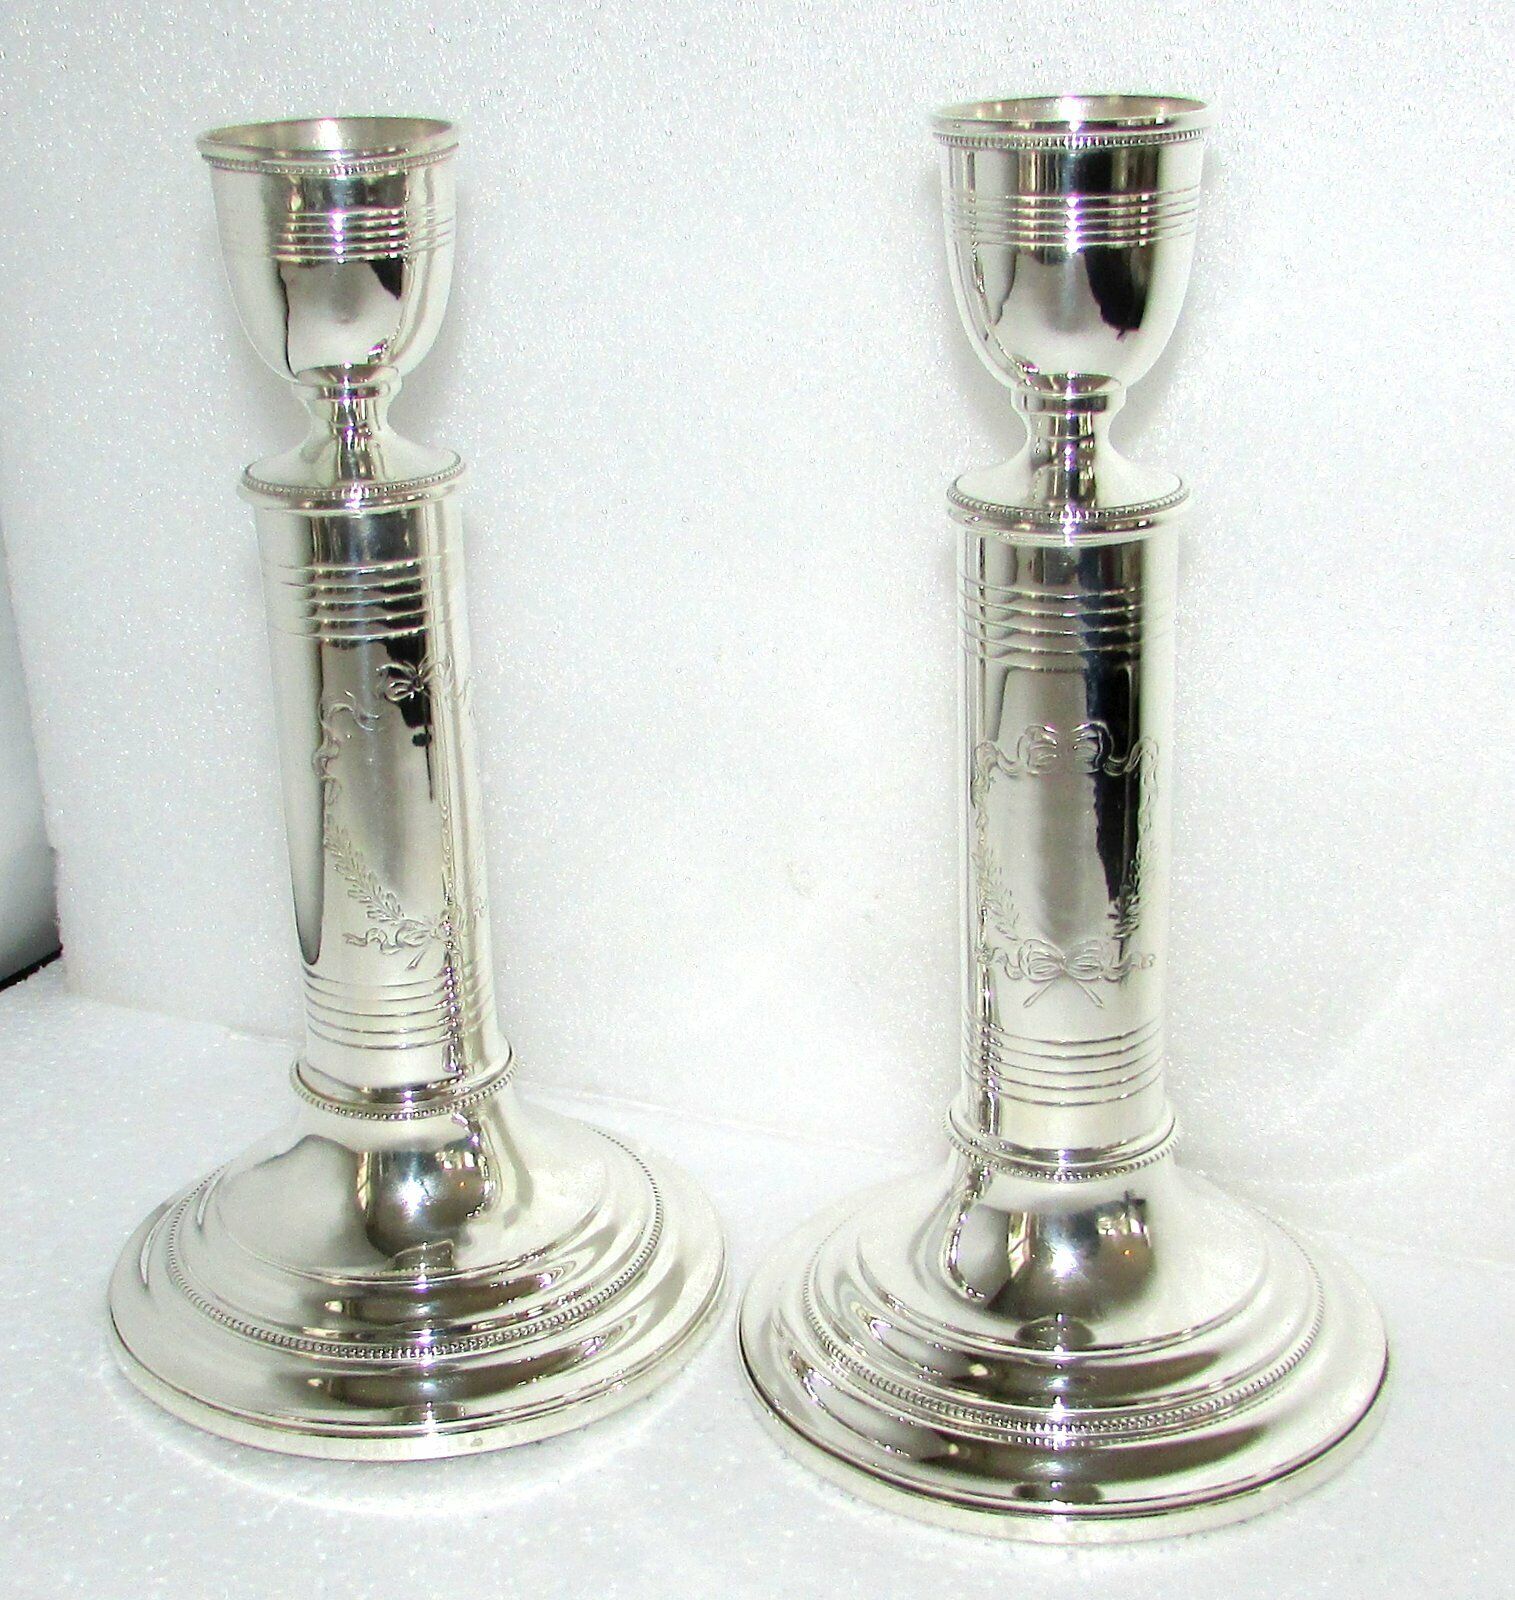 PAIR WM B DURGIN CO STERLING SILVER 7 1/2" CANDLESTICKS CANDLE HOLDERS C1900